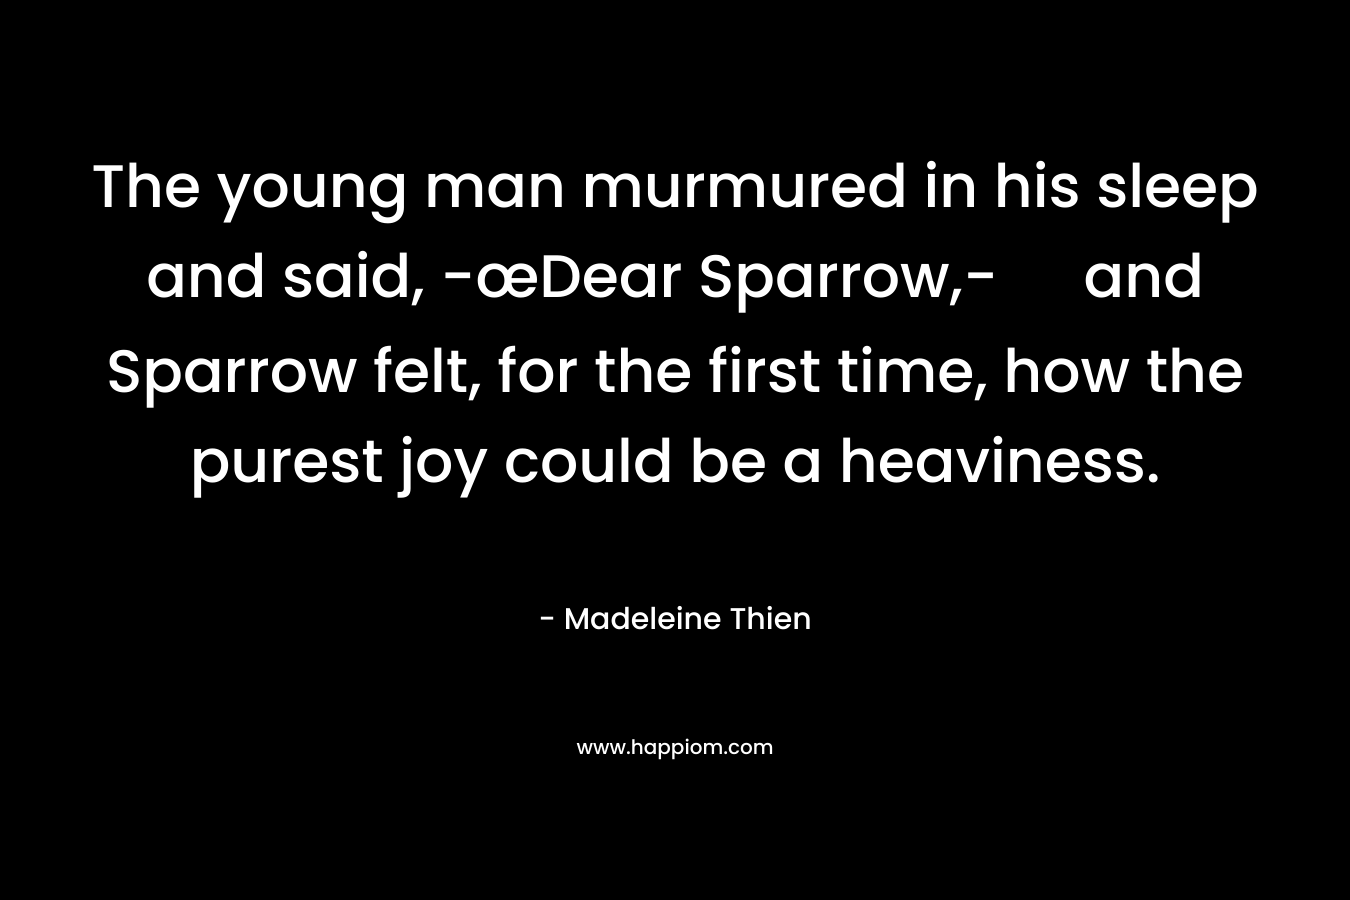 The young man murmured in his sleep and said, -œDear Sparrow,- and Sparrow felt, for the first time, how the purest joy could be a heaviness. – Madeleine Thien